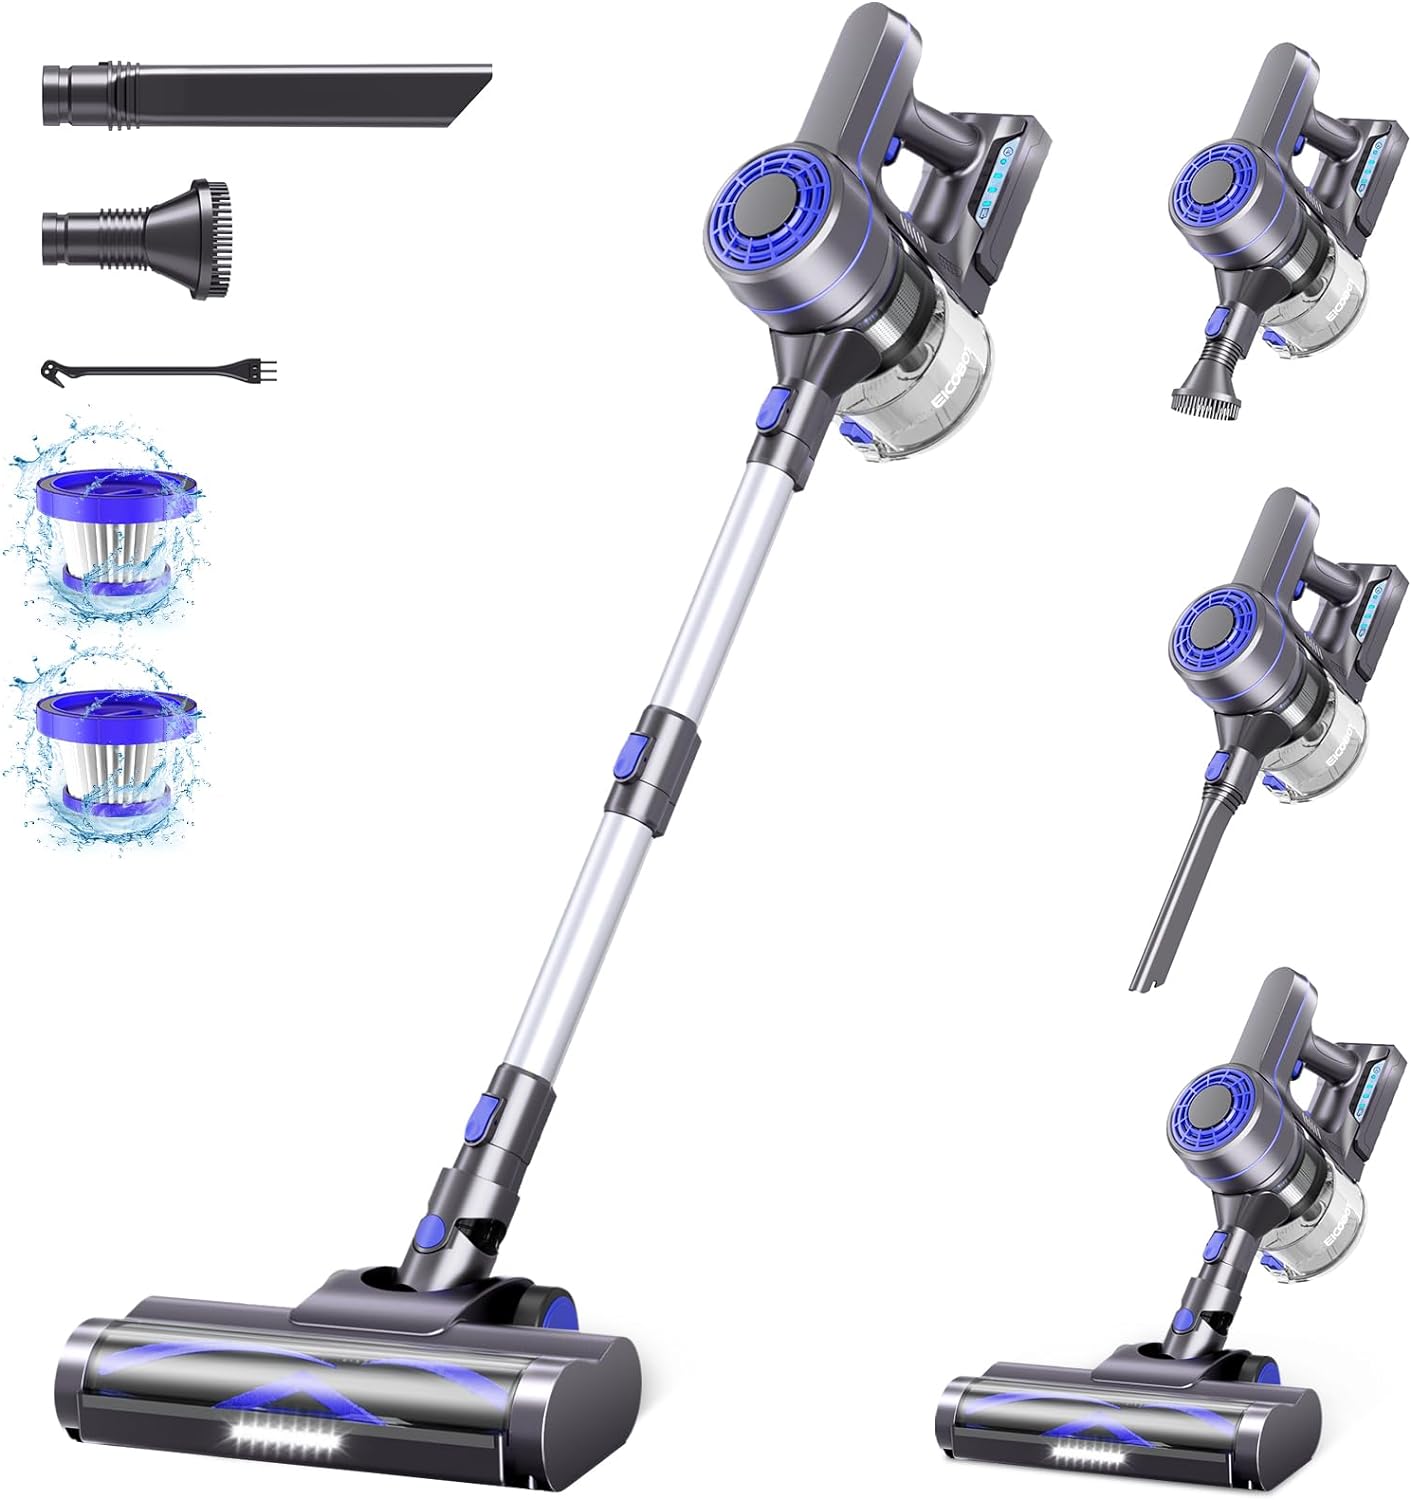 Eicobot Cordless Vacuum Cleaner Review: Powerful and Versatile